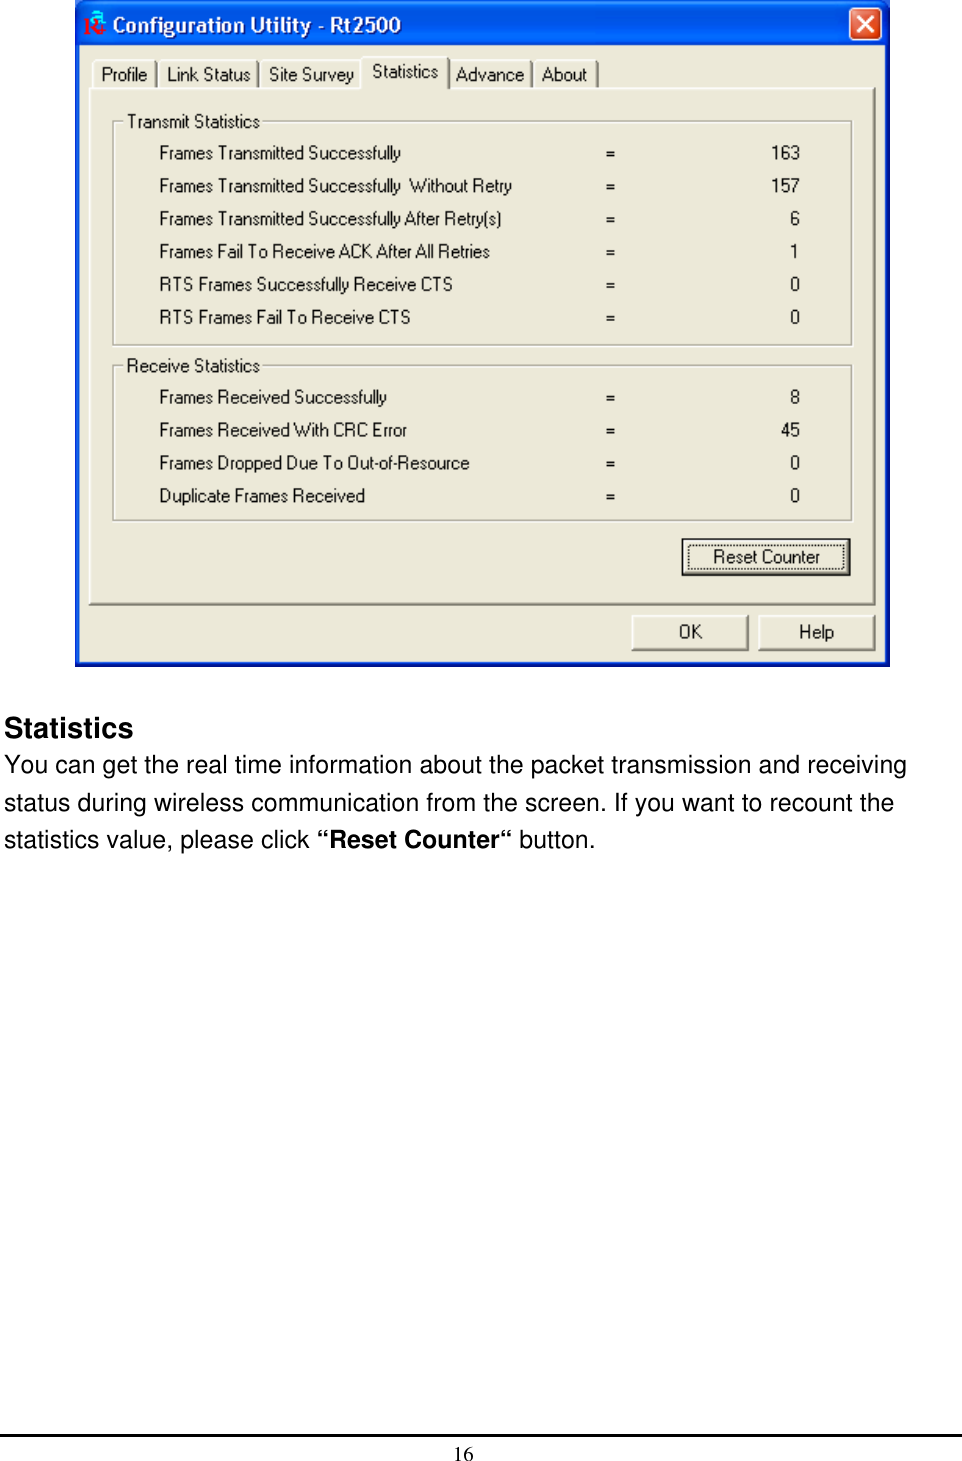    Statistics You can get the real time information about the packet transmission and receiving status during wireless communication from the screen. If you want to recount the statistics value, please click “Reset Counter“ button.  16  